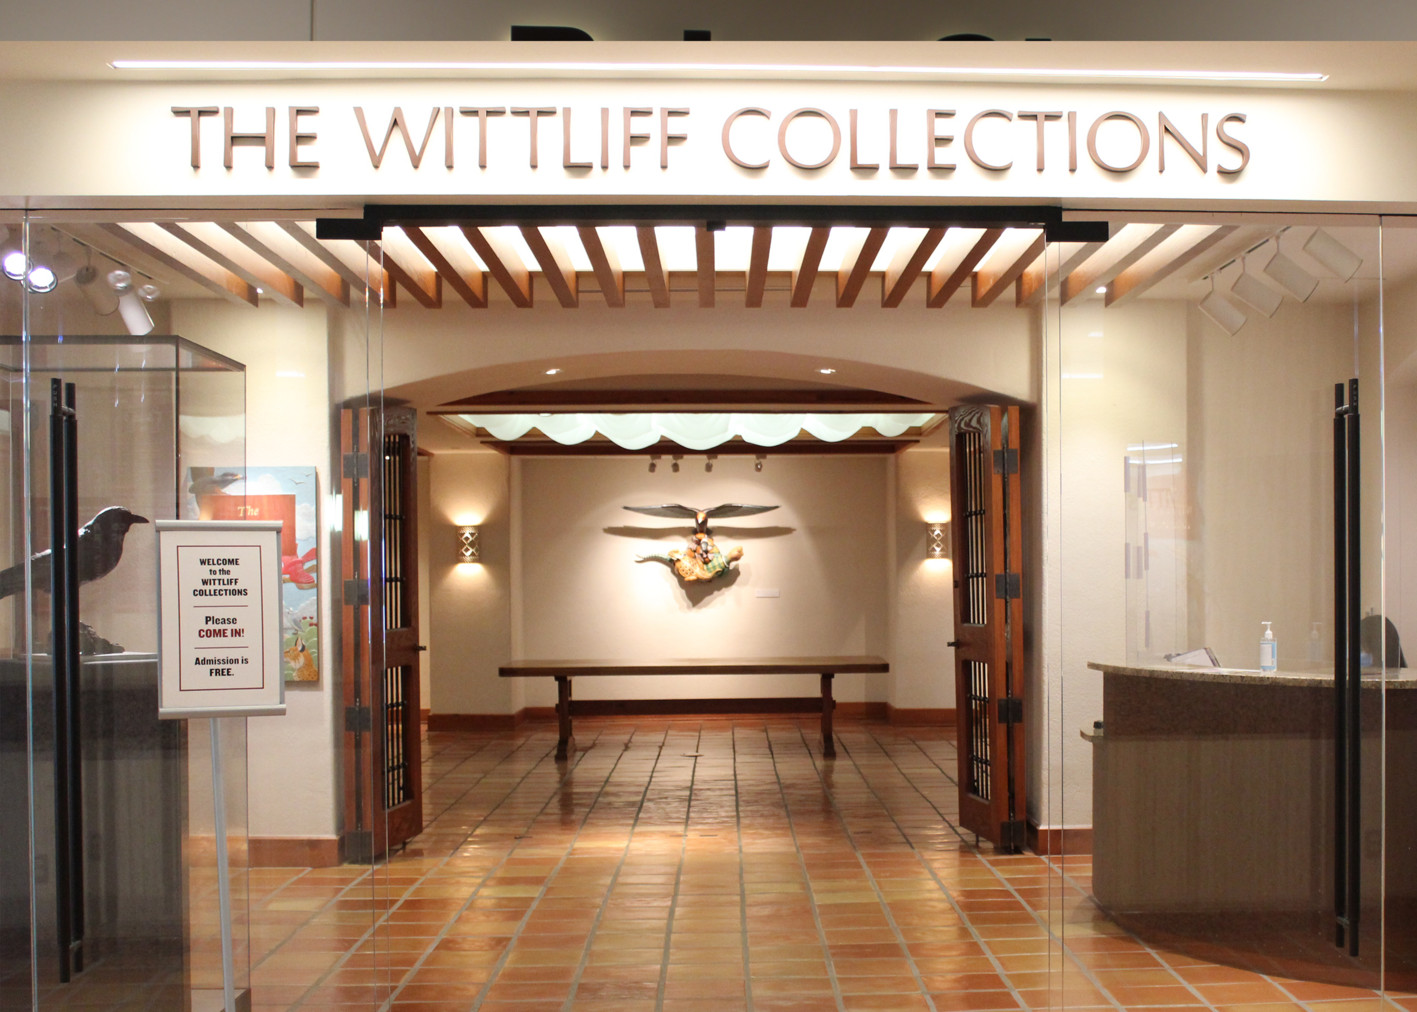 The Wittliff entrance